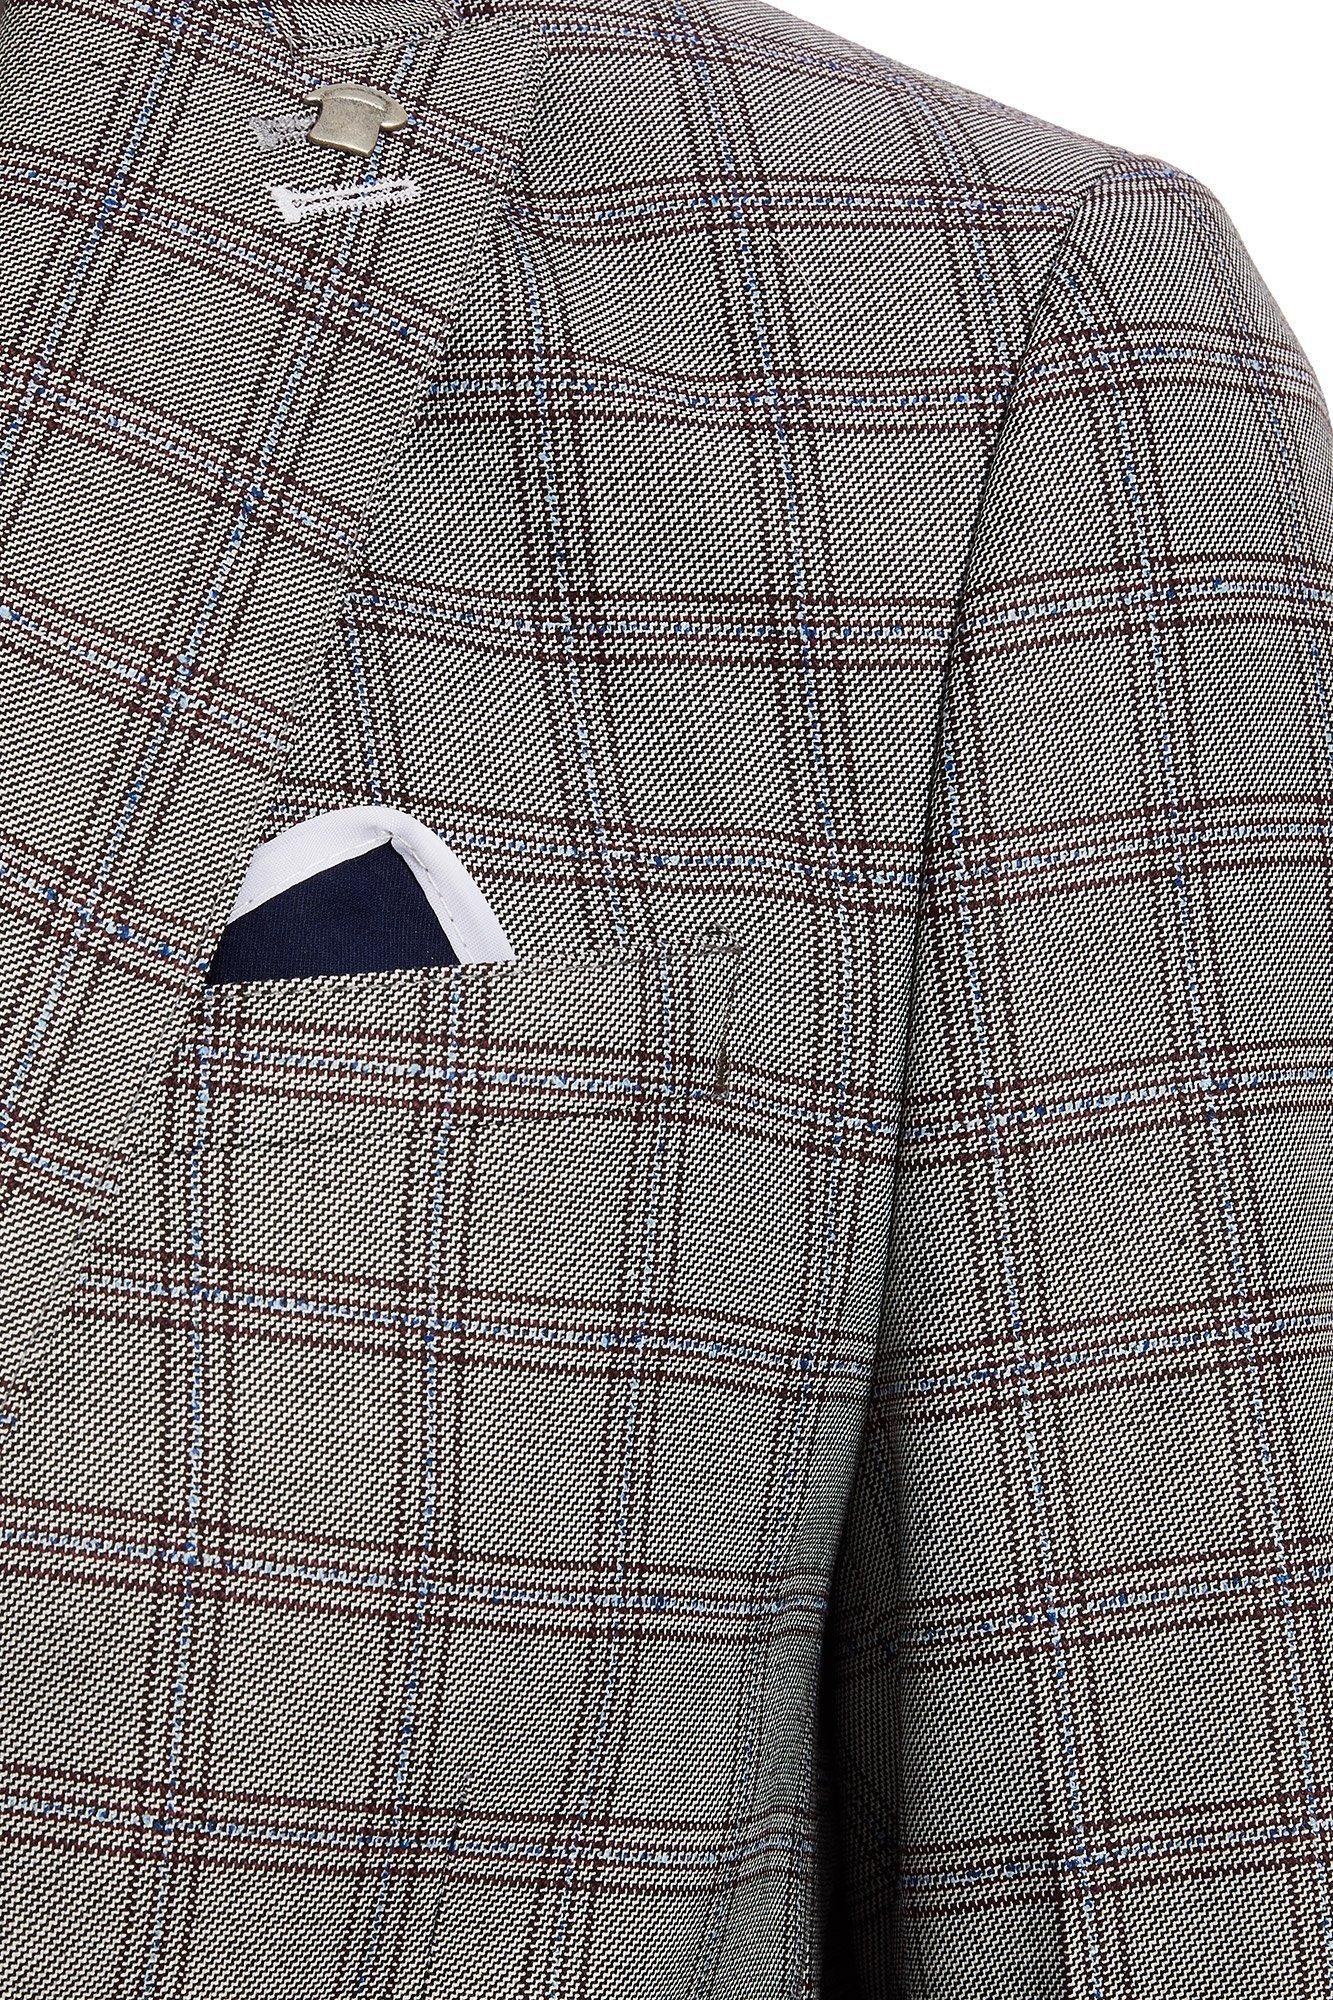 Grey Check Pattern  	Double Button Fastening  	Double Vented Back  	Functional Side Pockets  	Internal Pockets  	Pocket Square  	Lined with Internal Pockets